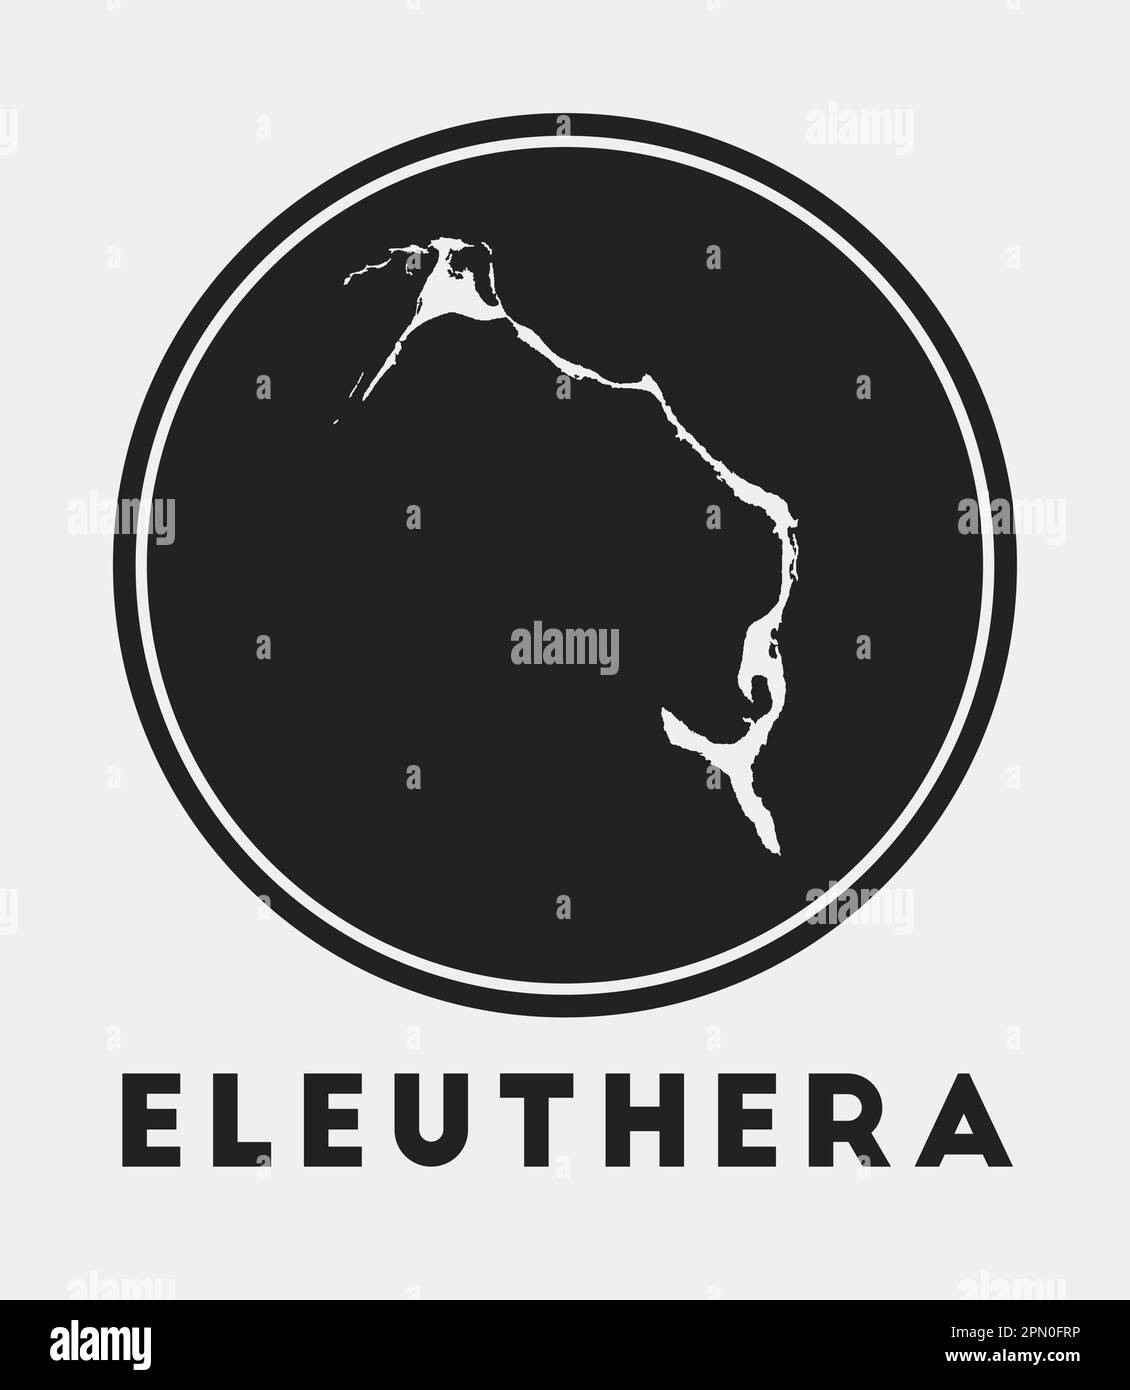 Eleuthera icon. Round logo with island map and title. Stylish Eleuthera badge with map. Vector illustration. Stock Vector